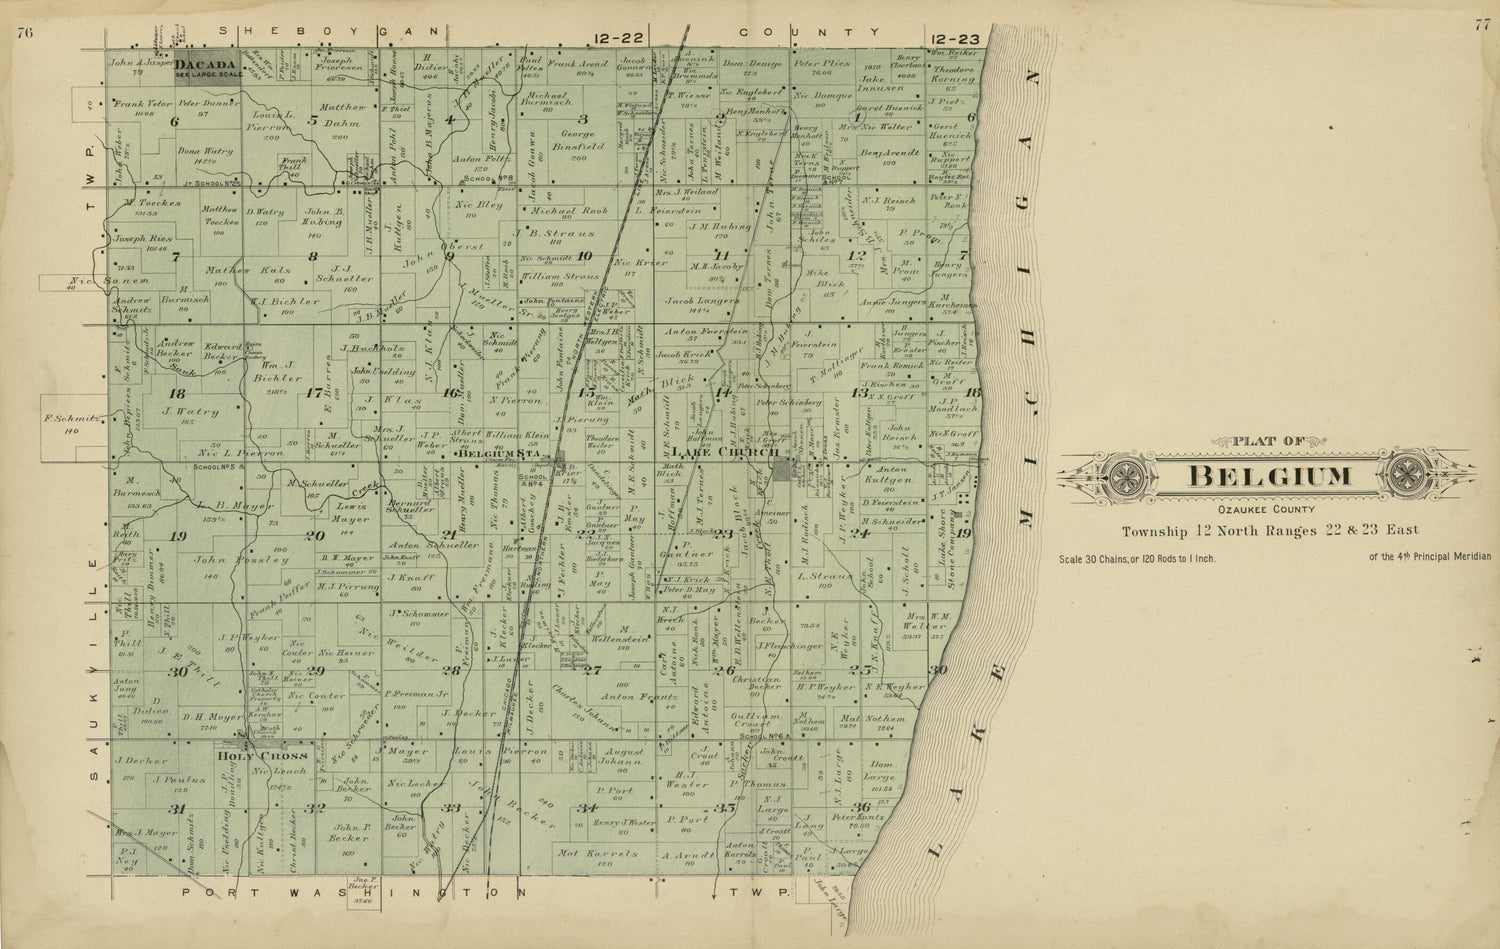 This old map of Plat of Belgium, Ozaukee County from Plat Book of Washington and Ozaukee Counties, Wisconsin from 1915 was created by Albert Volk in 1915